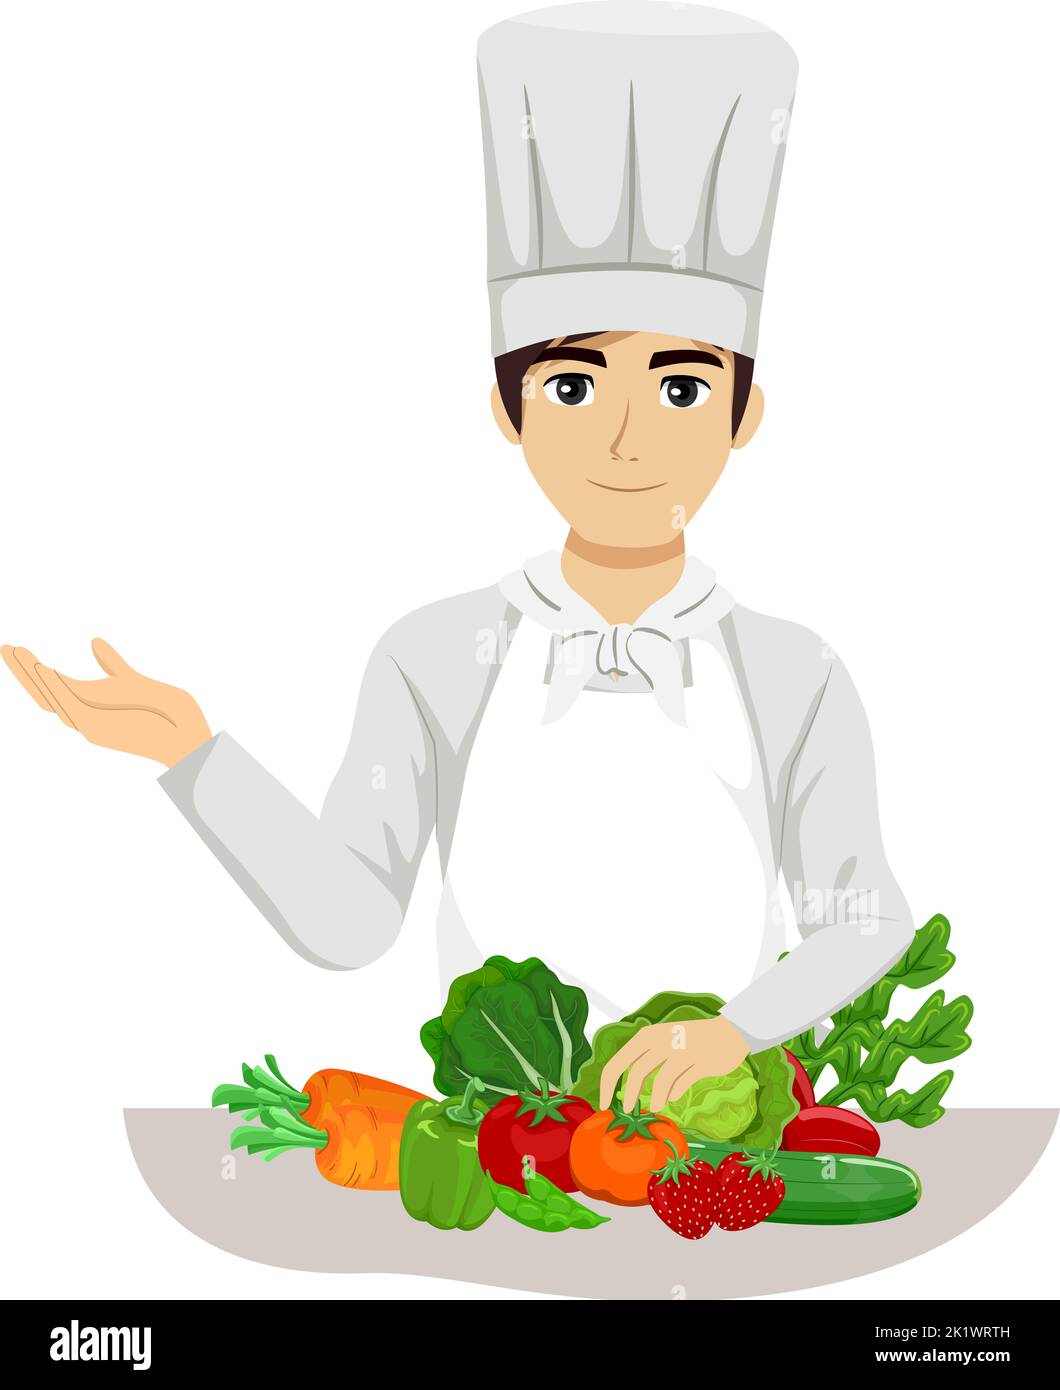 Illustration of Teen Guy Chef Wearing Apron and Toque Blanche Hat Talking about Vegetables Stock Photo